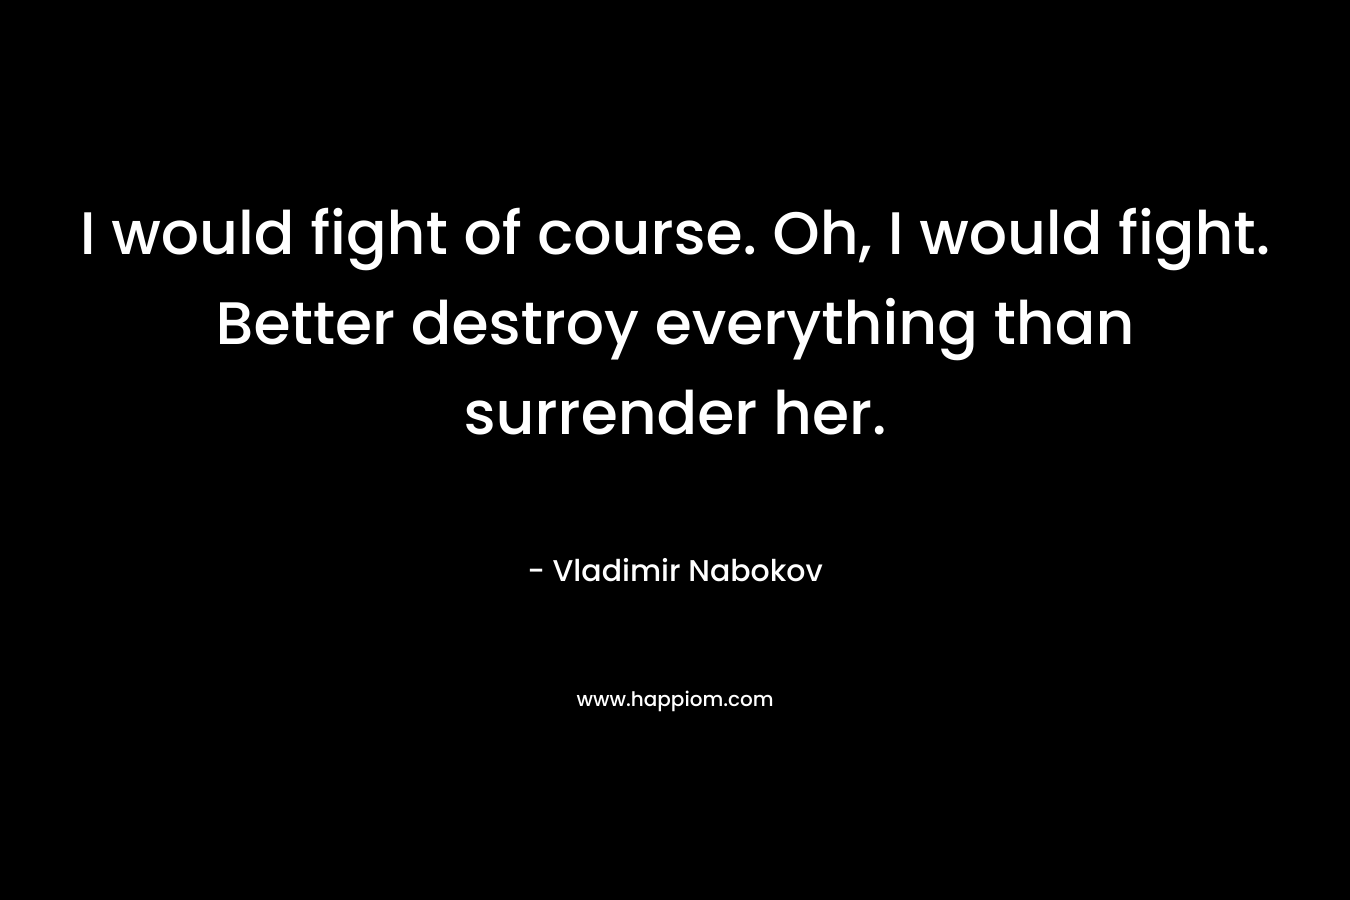 I would fight of course. Oh, I would fight. Better destroy everything than surrender her.